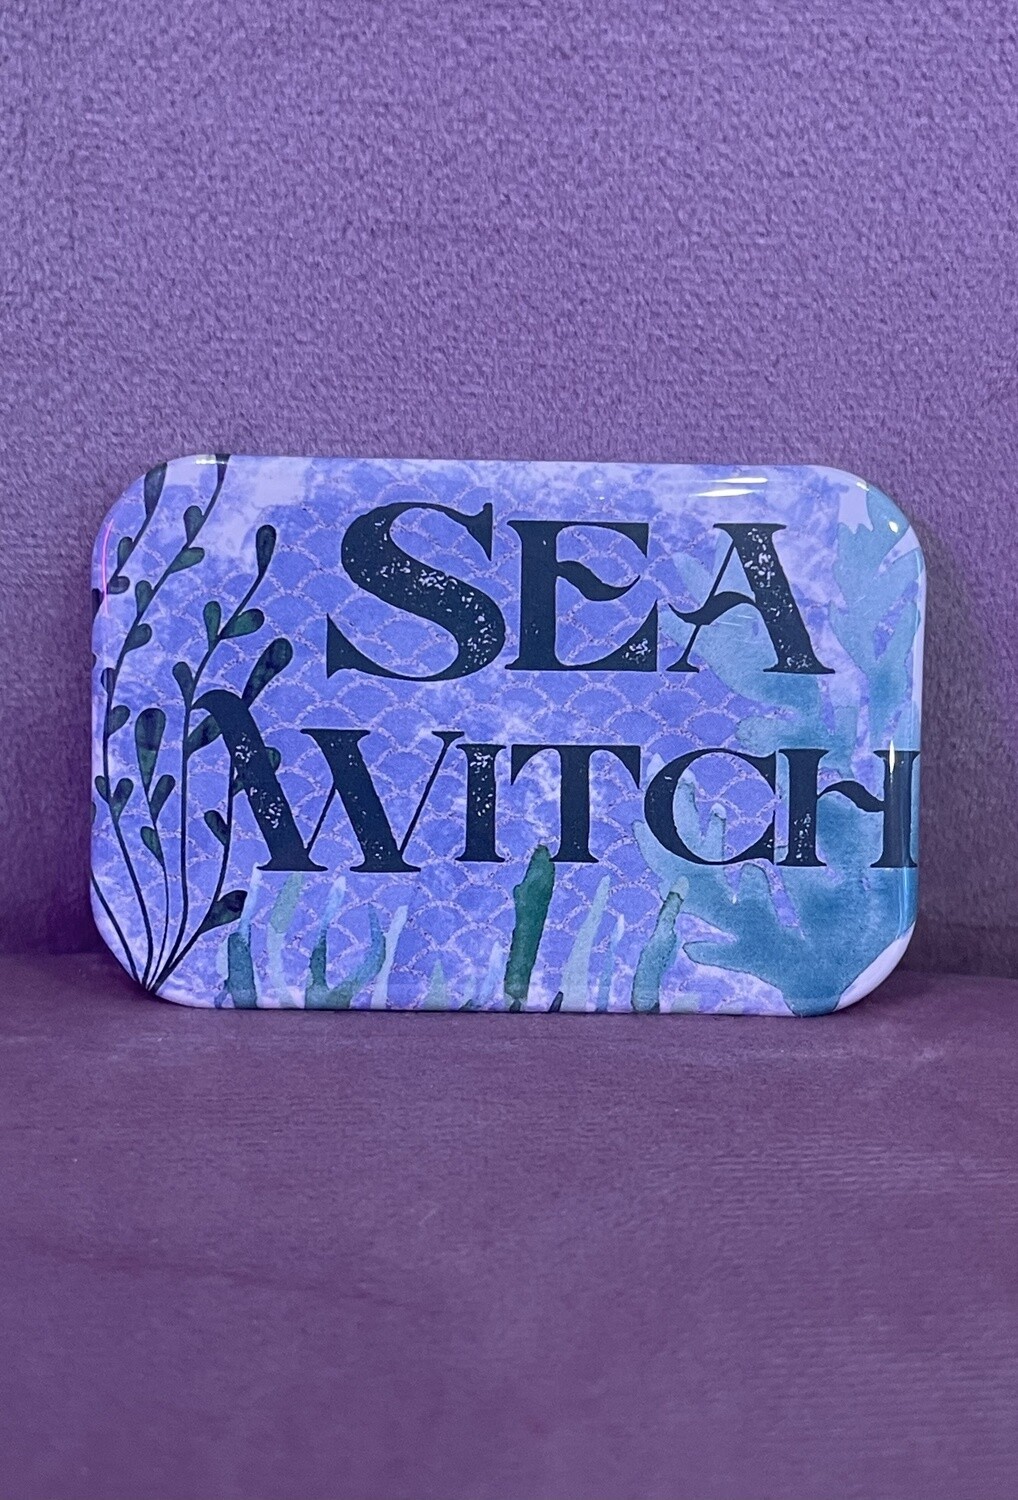 Sea Witch 2" x 3" Magnet